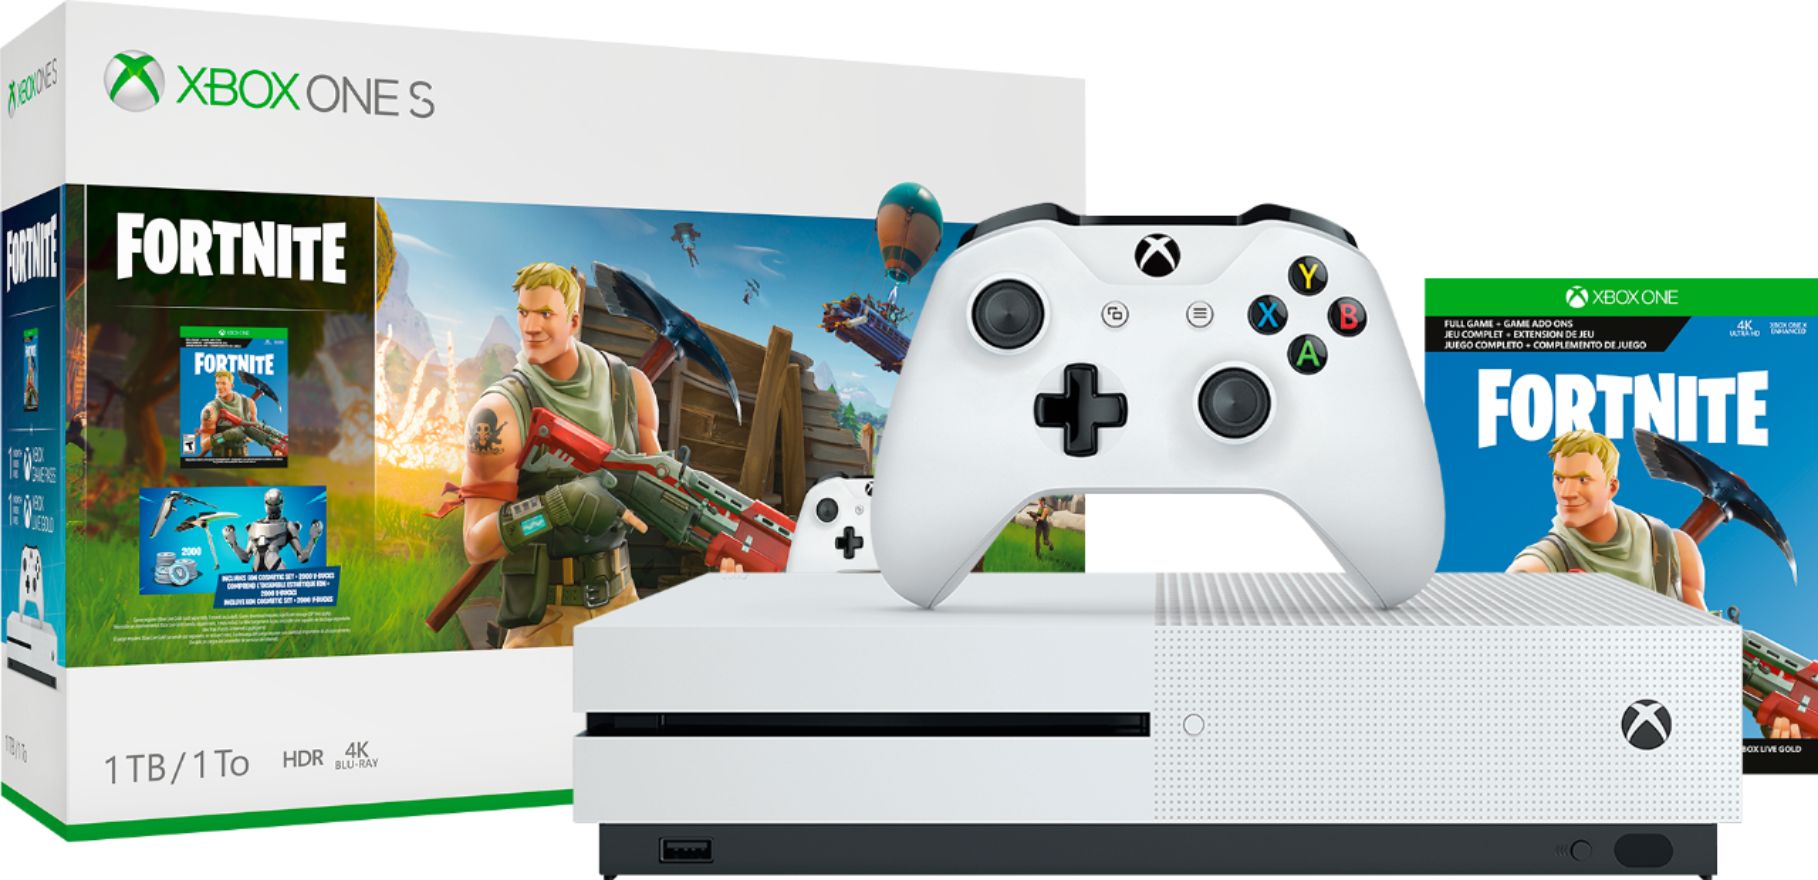 vaccination Senior citizens solidarity Best Buy: Microsoft Xbox One S 1TB Fortnite Bundle with 4K Ultra HD Blu-ray  White 234-00703